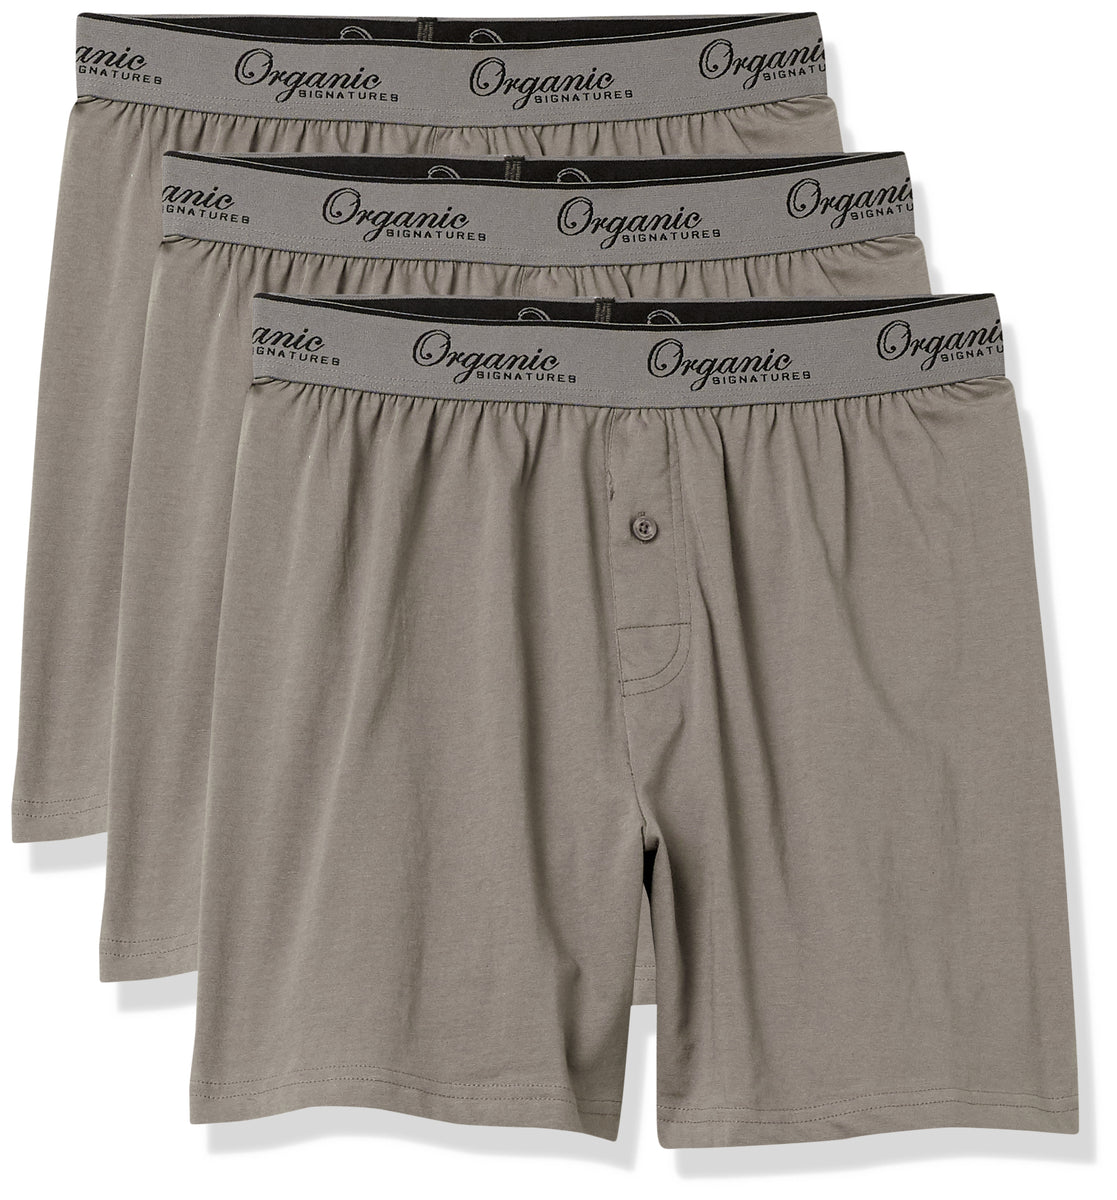 Men's Adaptive Knit Boxer Brief in Regular and Extended Sizes, Single